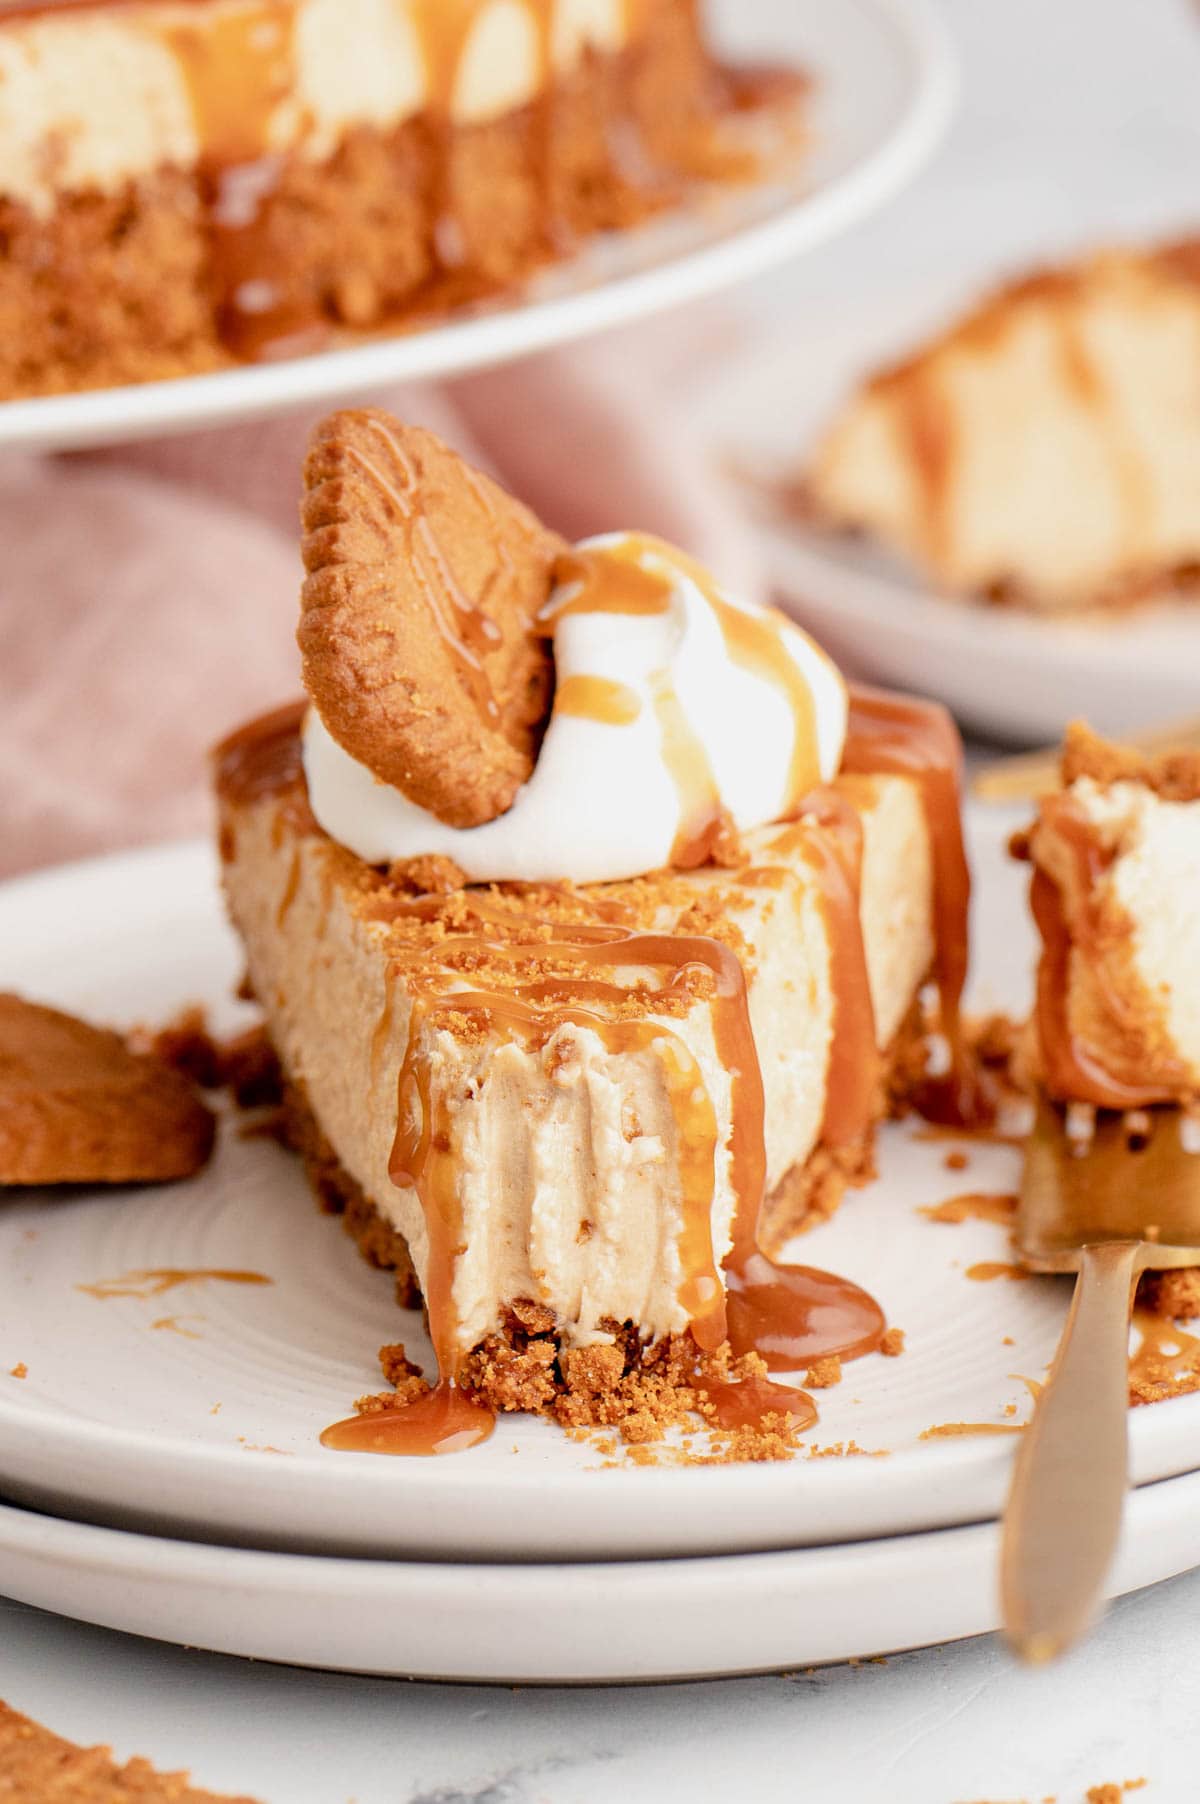 Slice of Biscoff cookie cheesecake with a bite removed, on a plate.